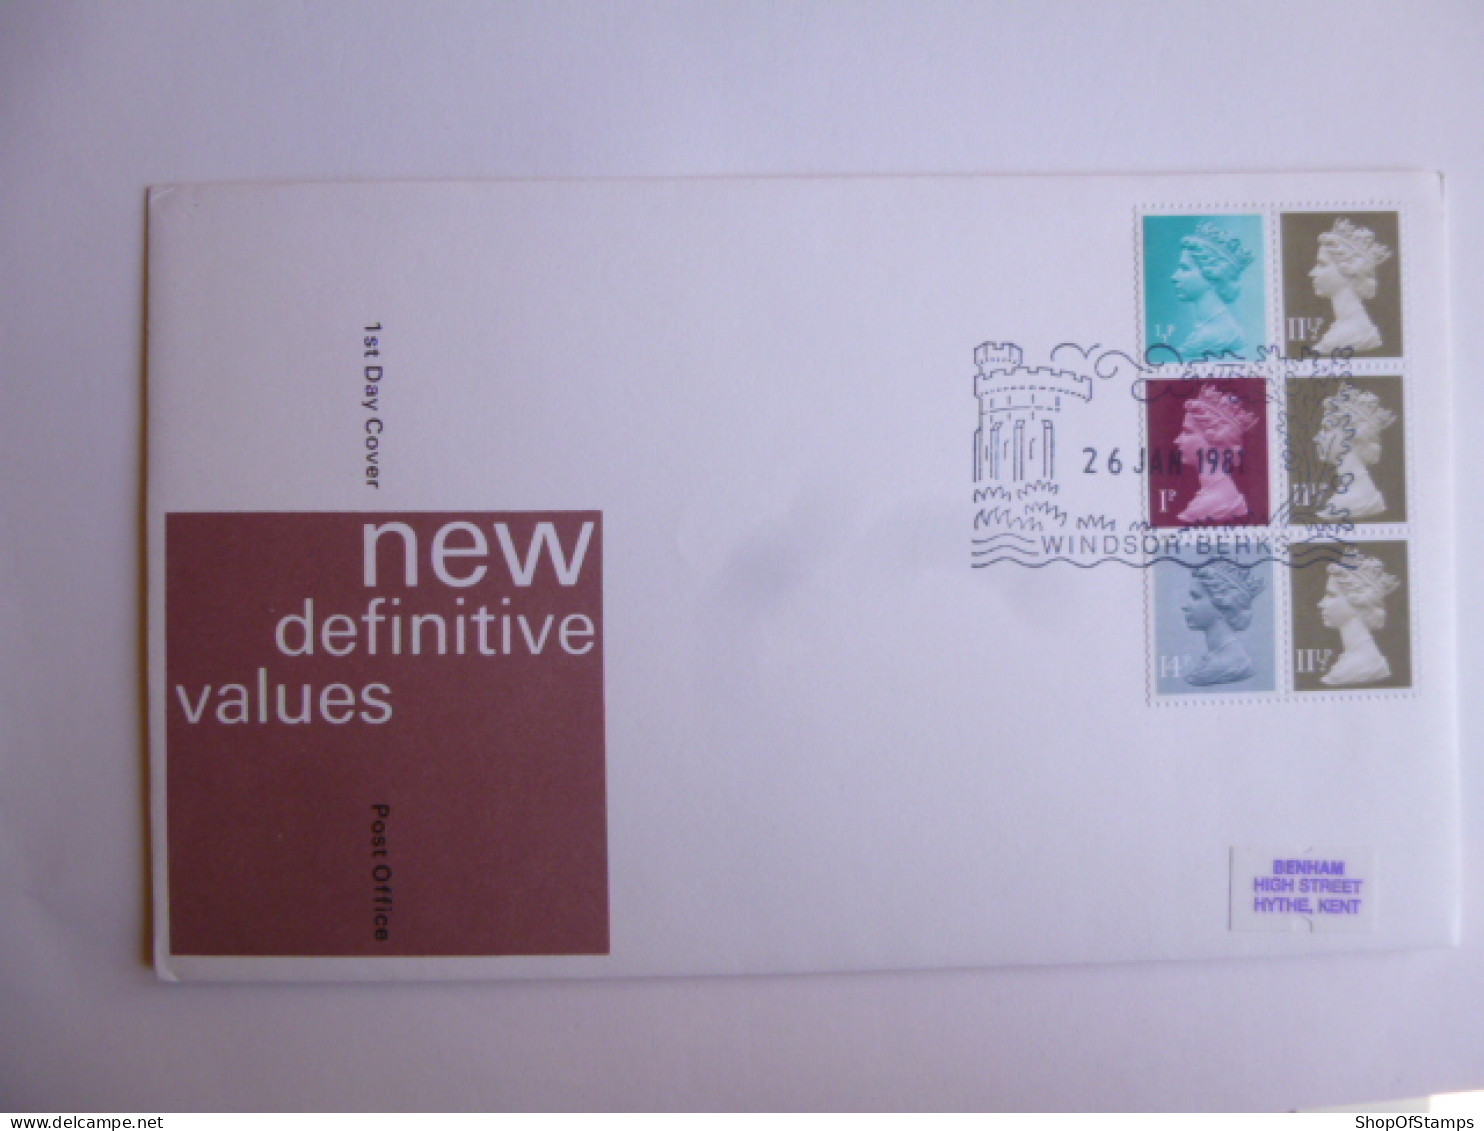 GREAT BRITAIN SG DEFINITIVES ISSUE DATED  26.01.81 FDC  - Unclassified